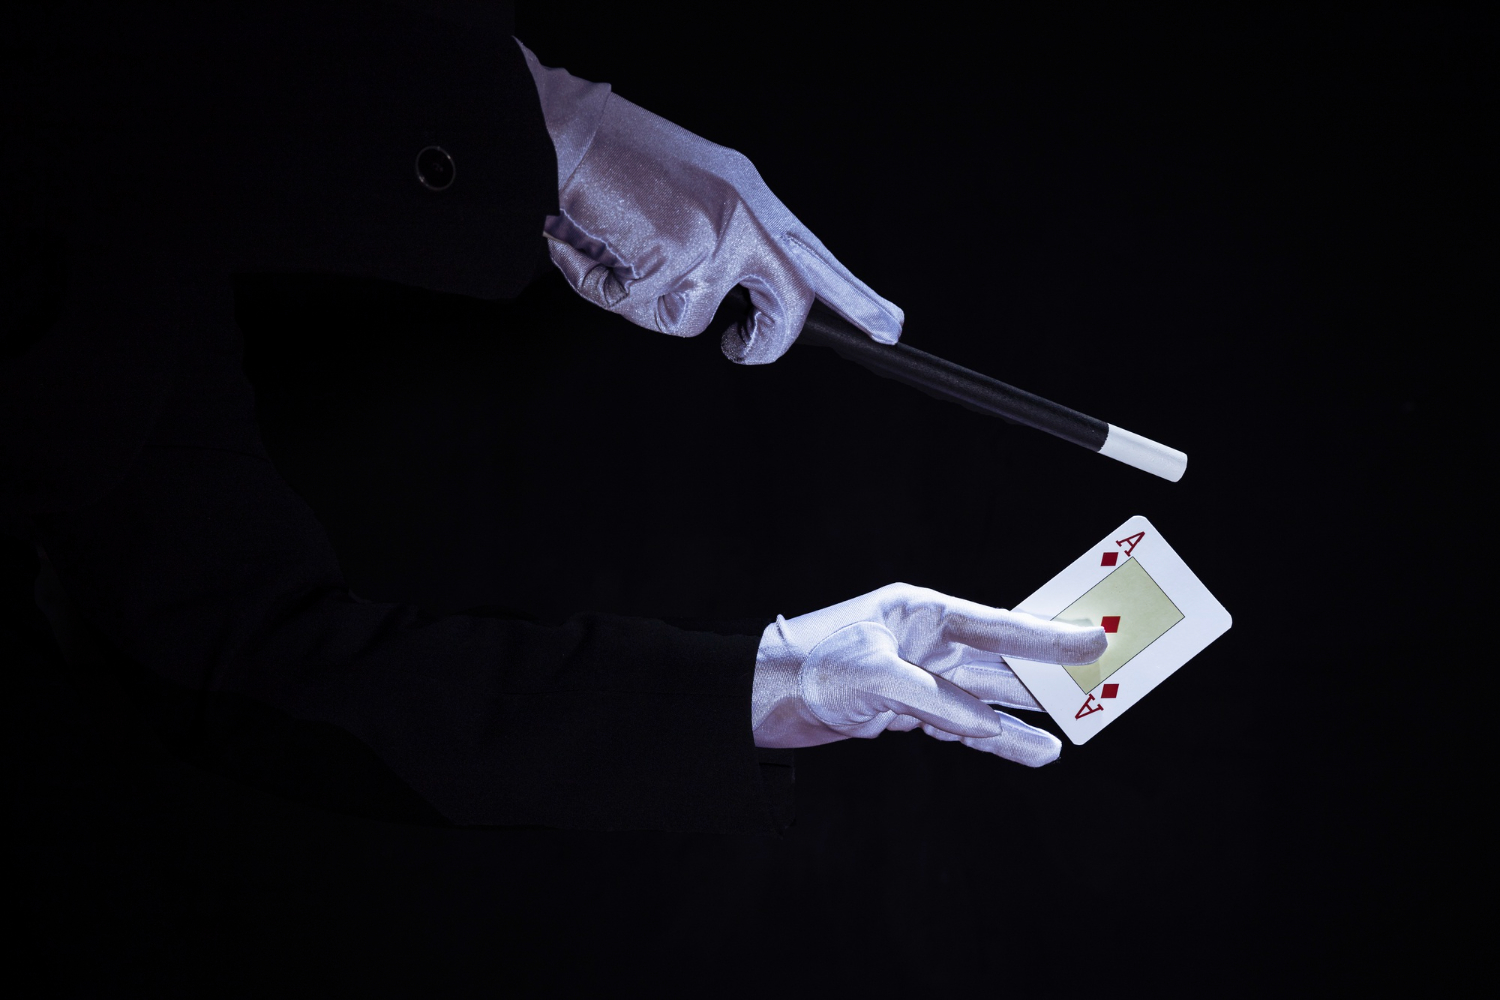 magician-performing-trick-aces-playing-card-against-black-background